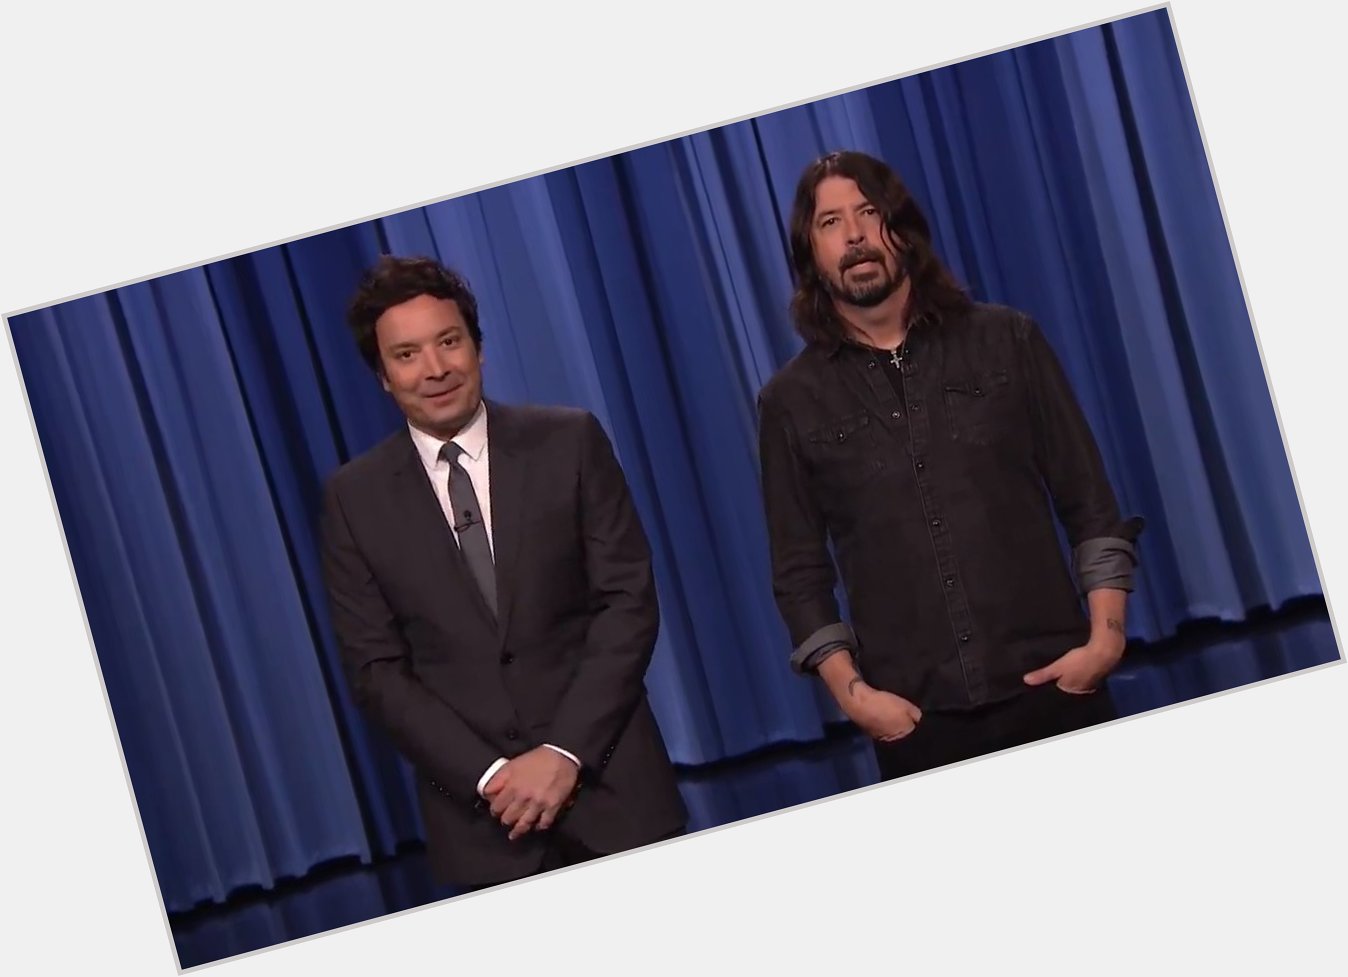 Jimmy & Dave Grohl sing Happy Birthday to Bob Dylan!  